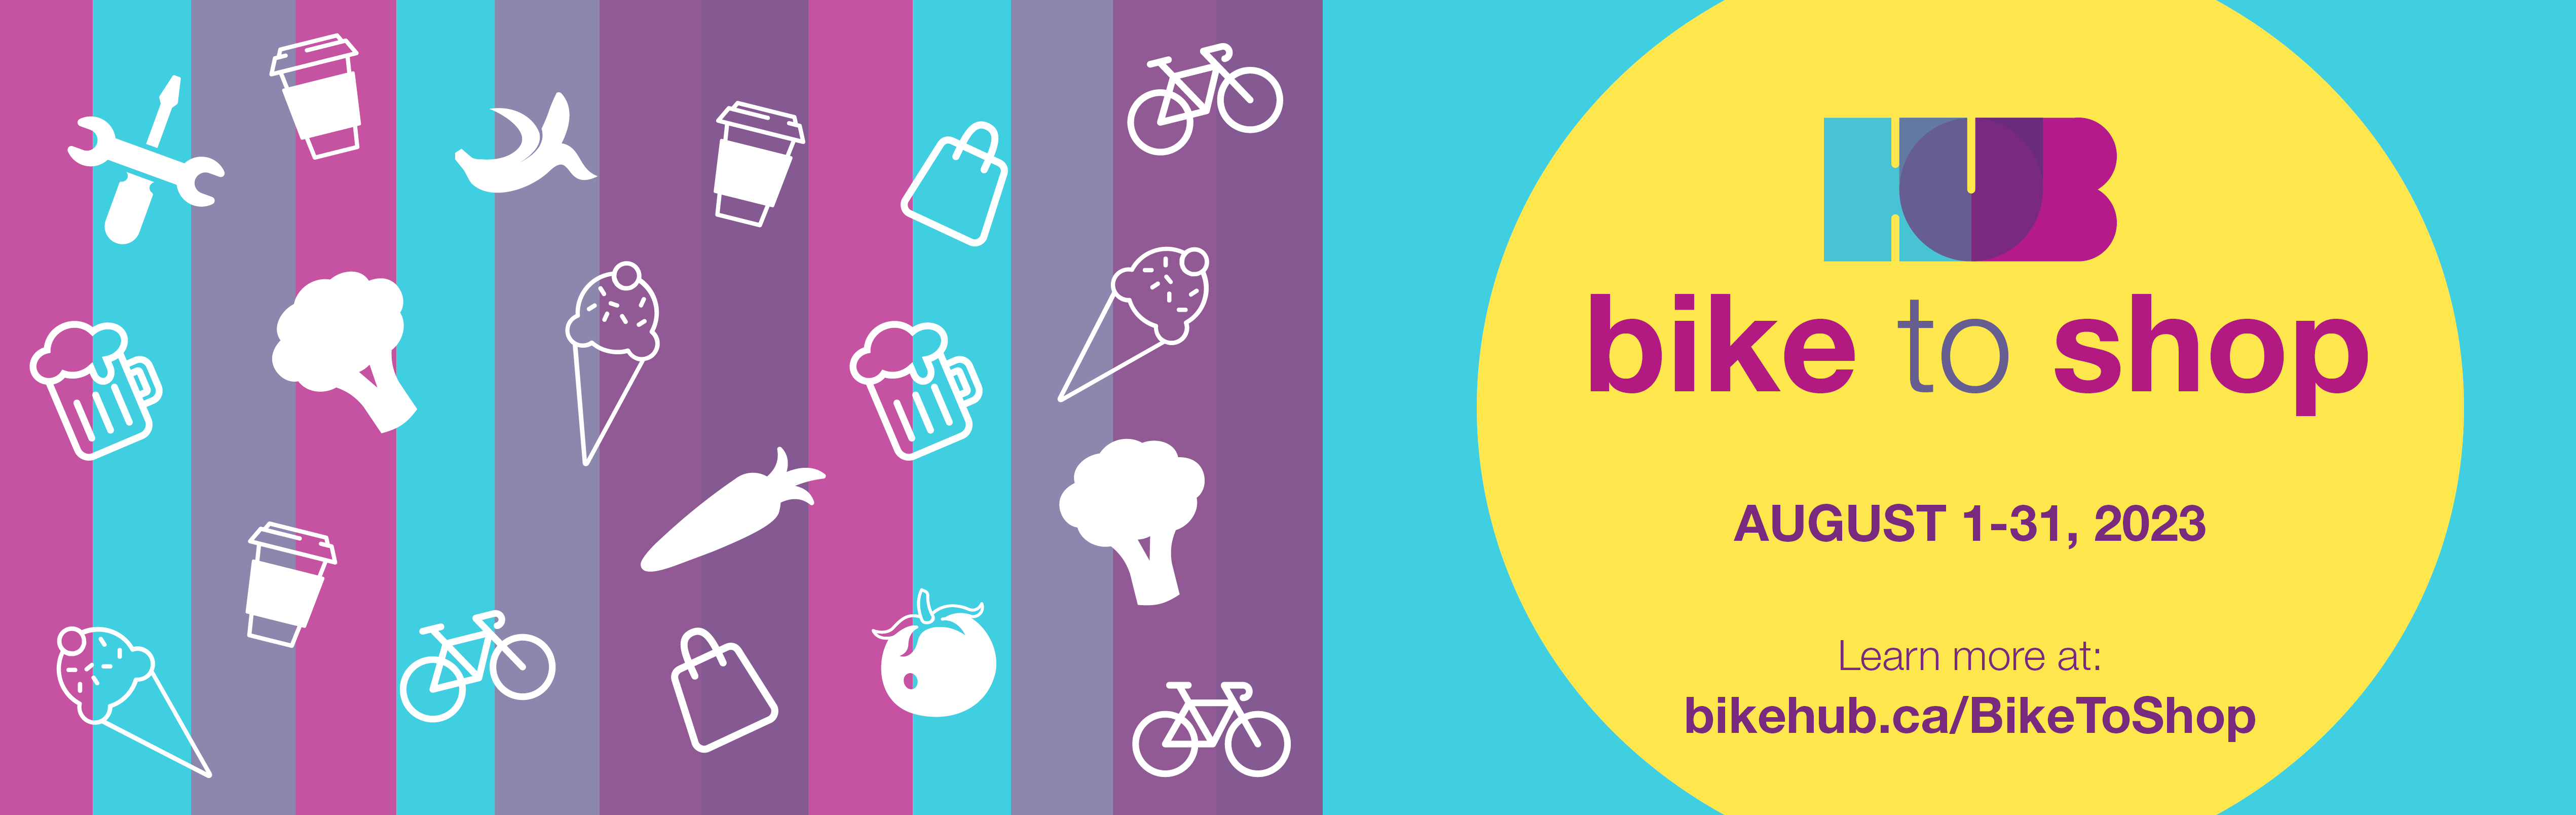 Bike to Shop Banner. The event takes place from August 1-31, 2023.